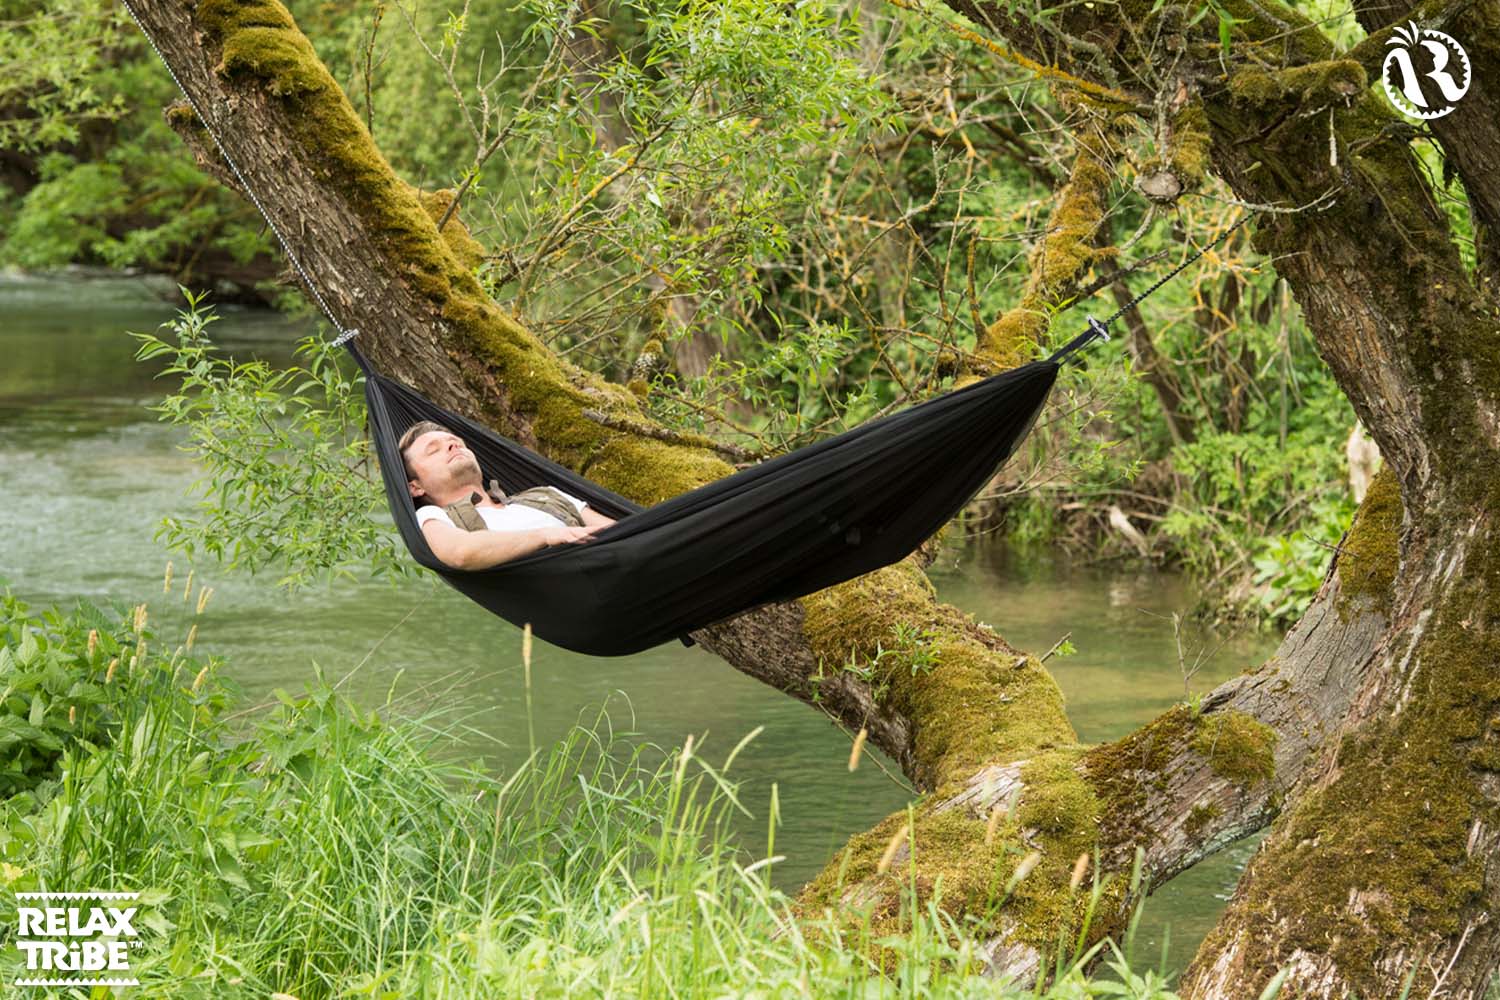 moskito-traveller-extreme-single-portable-travel-hammock-anti-bugs-net-impregnated-outdoor-camping-black-river-trees-2